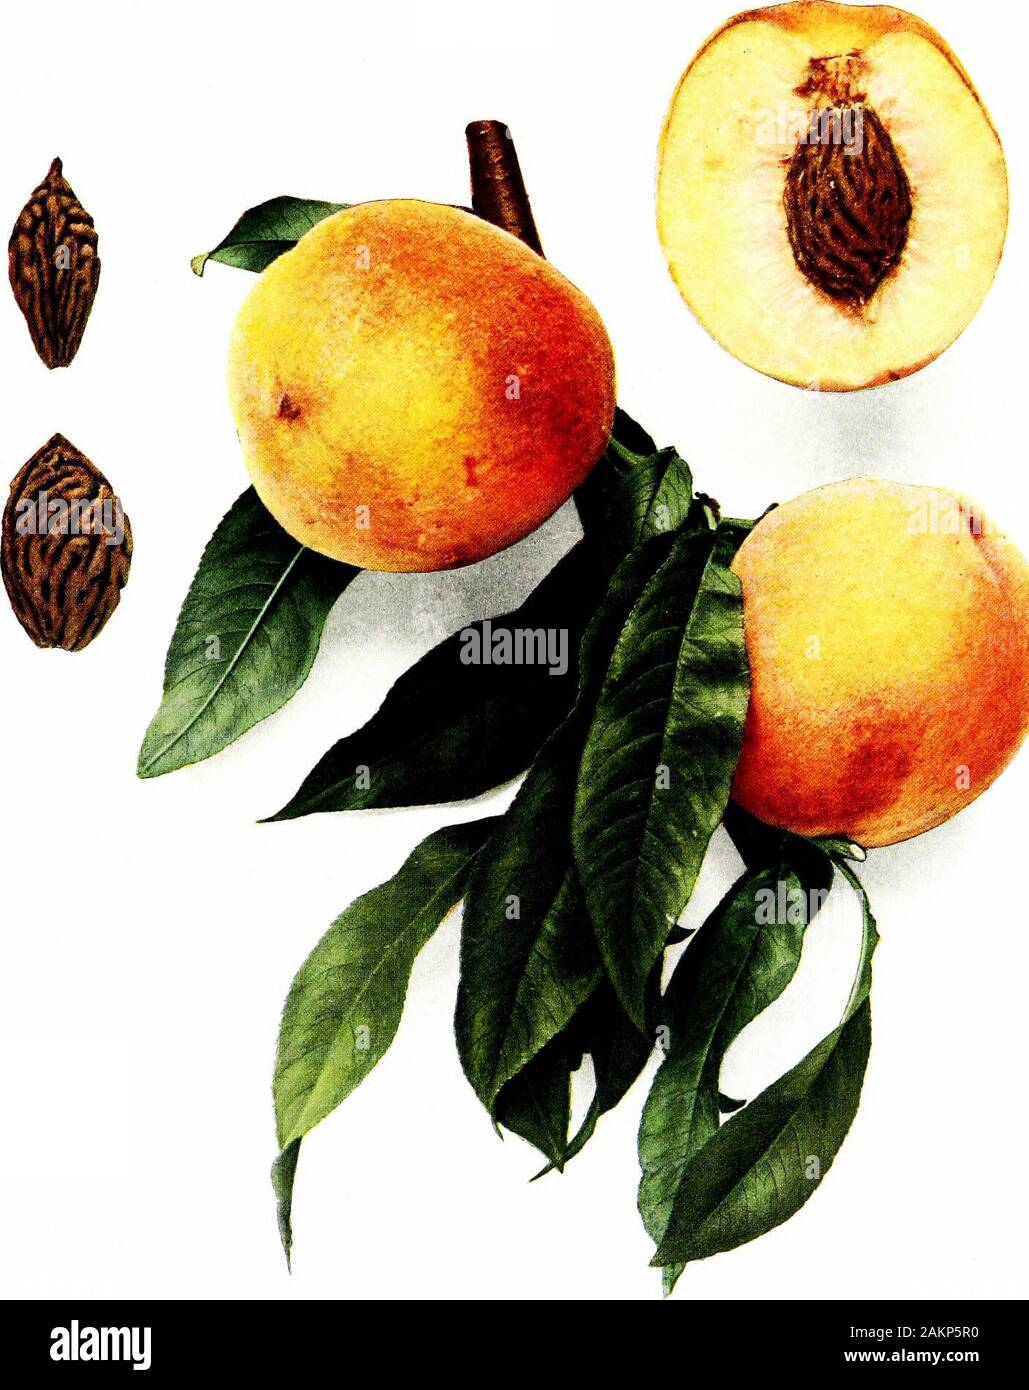 The peaches of New York . n-sixteenths inch wide, flattened wedge-like at the base,oval to obovate, winged, usually without btdge, long-pointed at the apex, with pittedsurfaces; ventral suture deeply furrowed, wide; dorsal suture deeply grooved. CHINESE CLmO I. Downing Fr. Trees Am. 636. 1857. 2. Horticulturist 14:107. 1859. 3. Am. Pom. Soc. Cat.18. 1871. 4. Del. Sta. Rpt. 13:85, 86, 95, 107, fig. 4. 1901. Shanghae. 5, Mag. Hort. 17:464. 1851. 6. Card. Chron. 693. 1852. 7. Downing Fr. Trees Am.641. 1857. Chinese Peach. 8. Horticulturist N. S. 3:286, 472. 1853. Shanghai, g. Jiogg Fruit Man. 2^1 Stock Photo